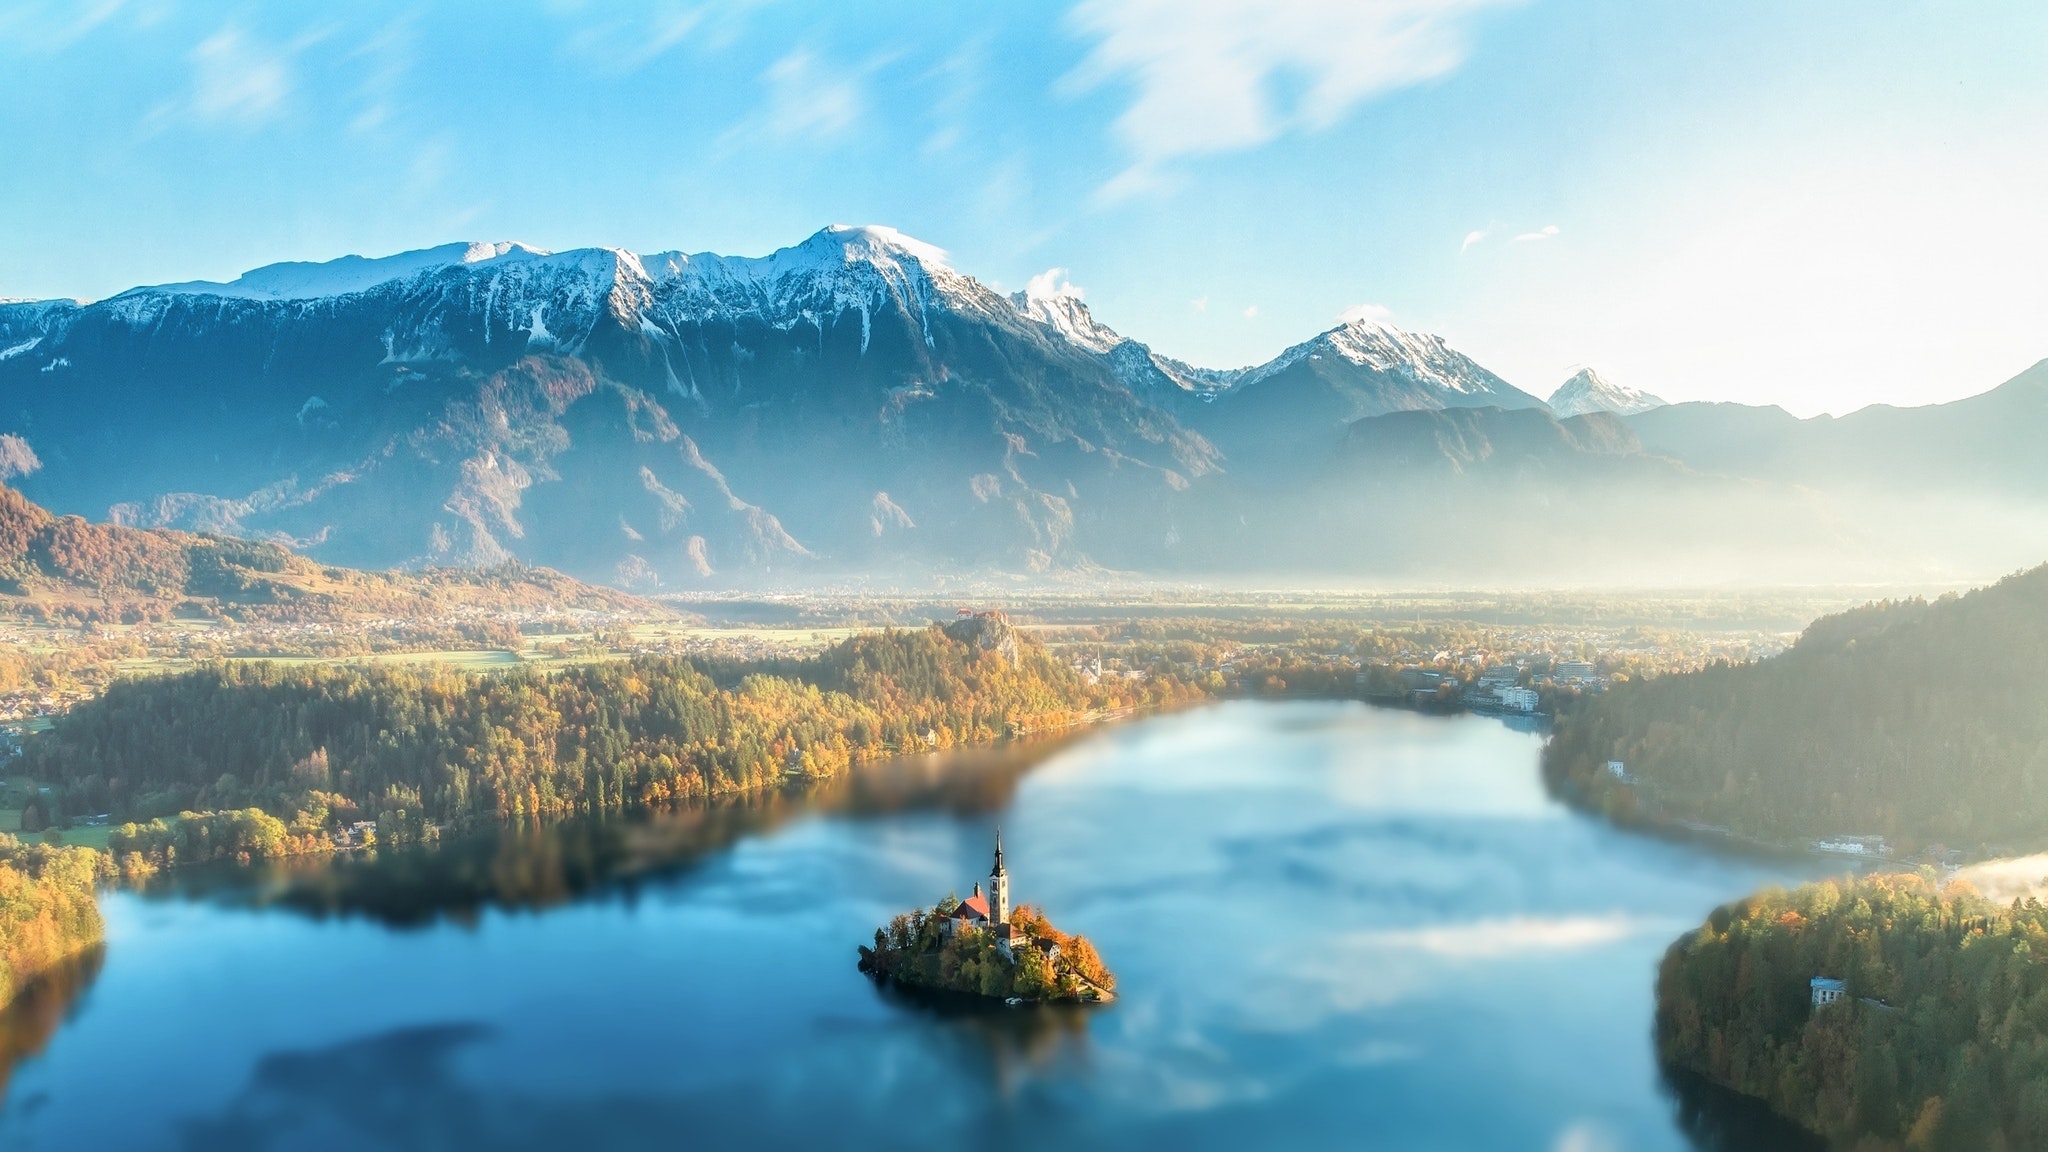 snowy peak, Mountains, Clouds,  dawn, Mist, Hills, Lake, Landscape, Nature, Outdoors, Snow, Reflection, Sunset, Pine trees, Water, Church, Slovenia, Lake Bled Wallpaper